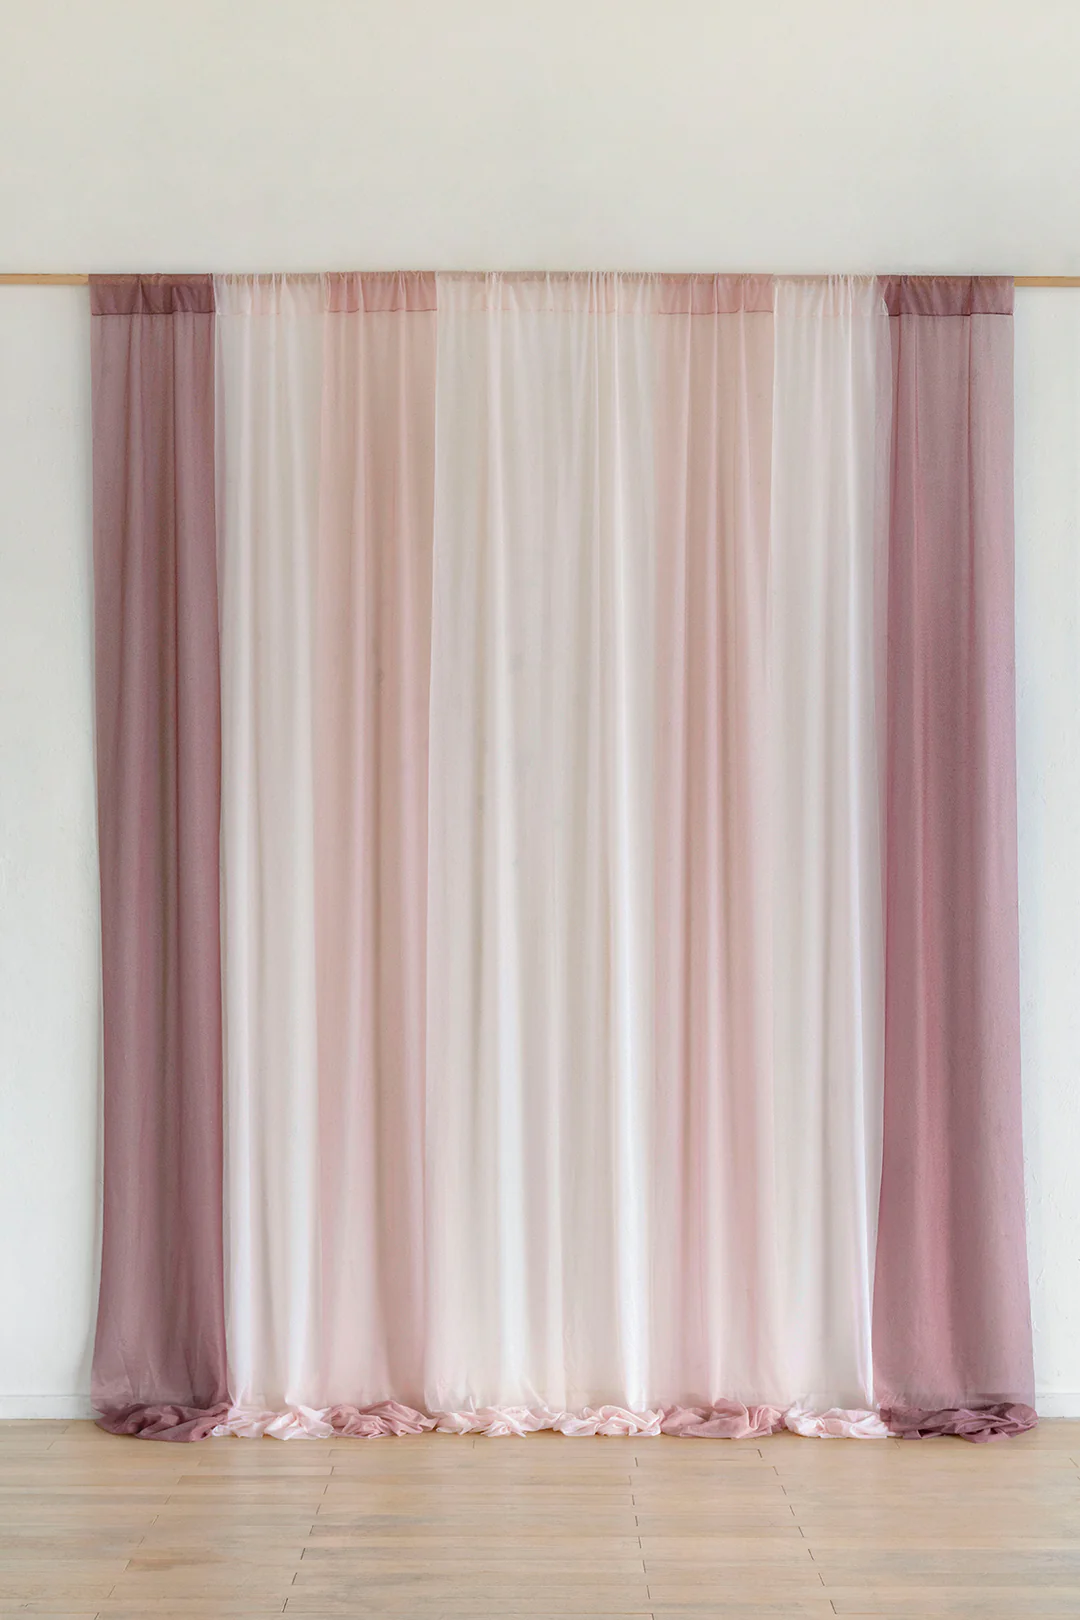 27 photo booth backrop curtains